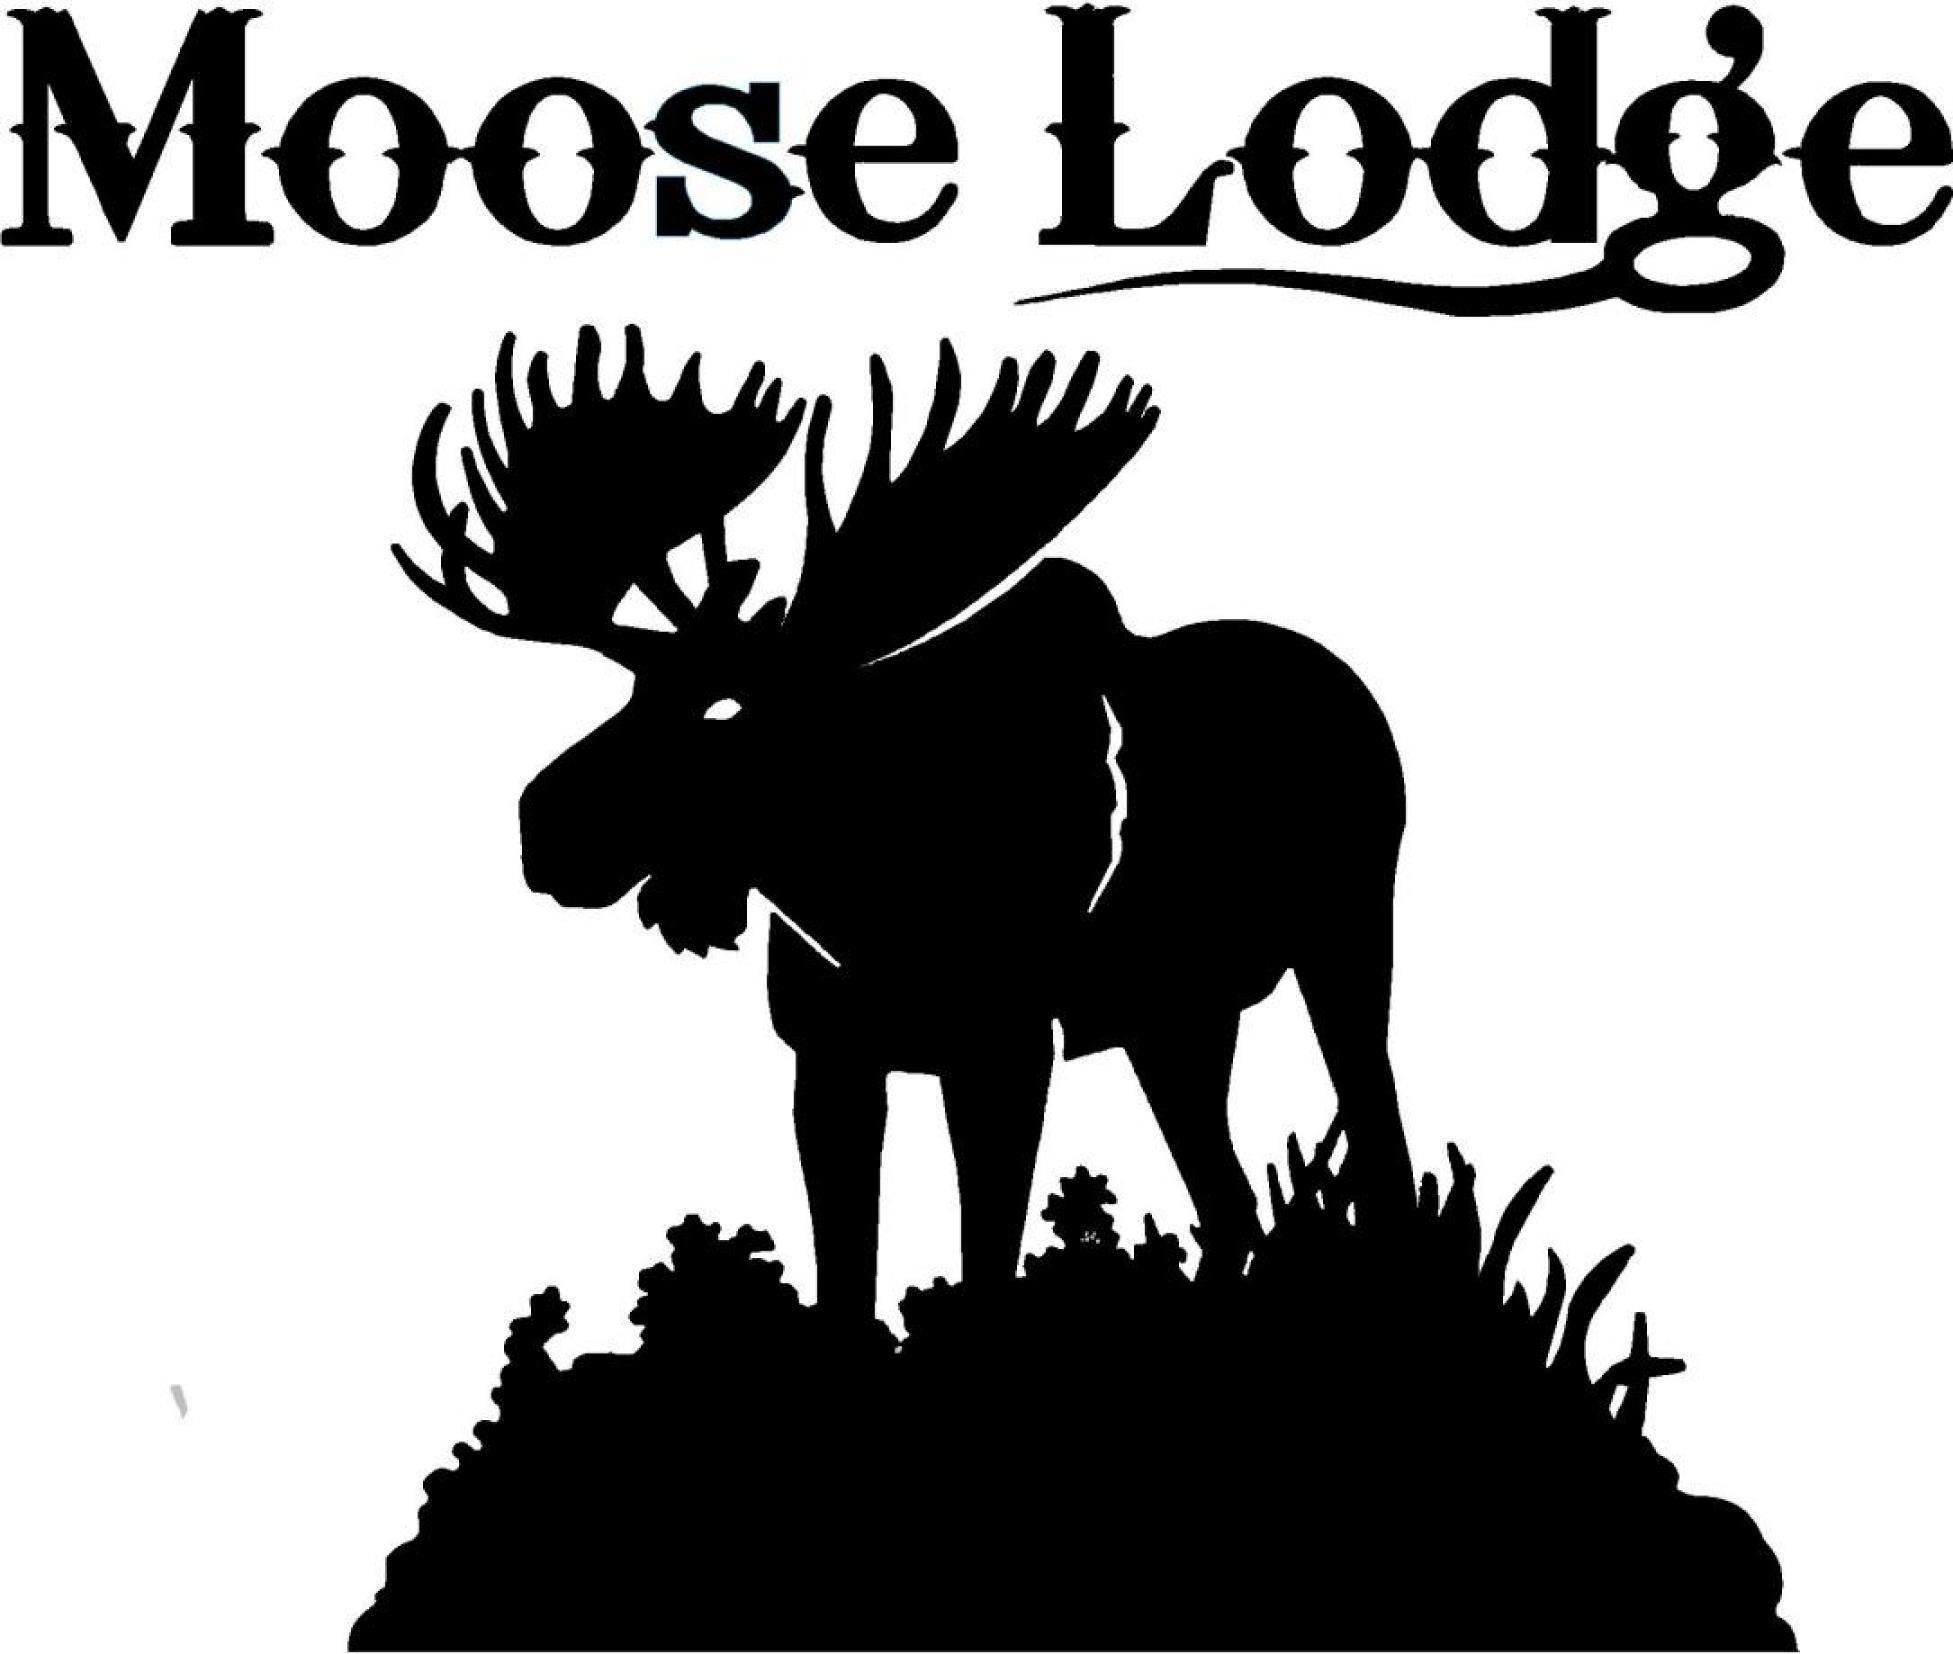 Who Has a Moose Logo - moose lodge logo. skilledthis has been a barbecue grill that was a